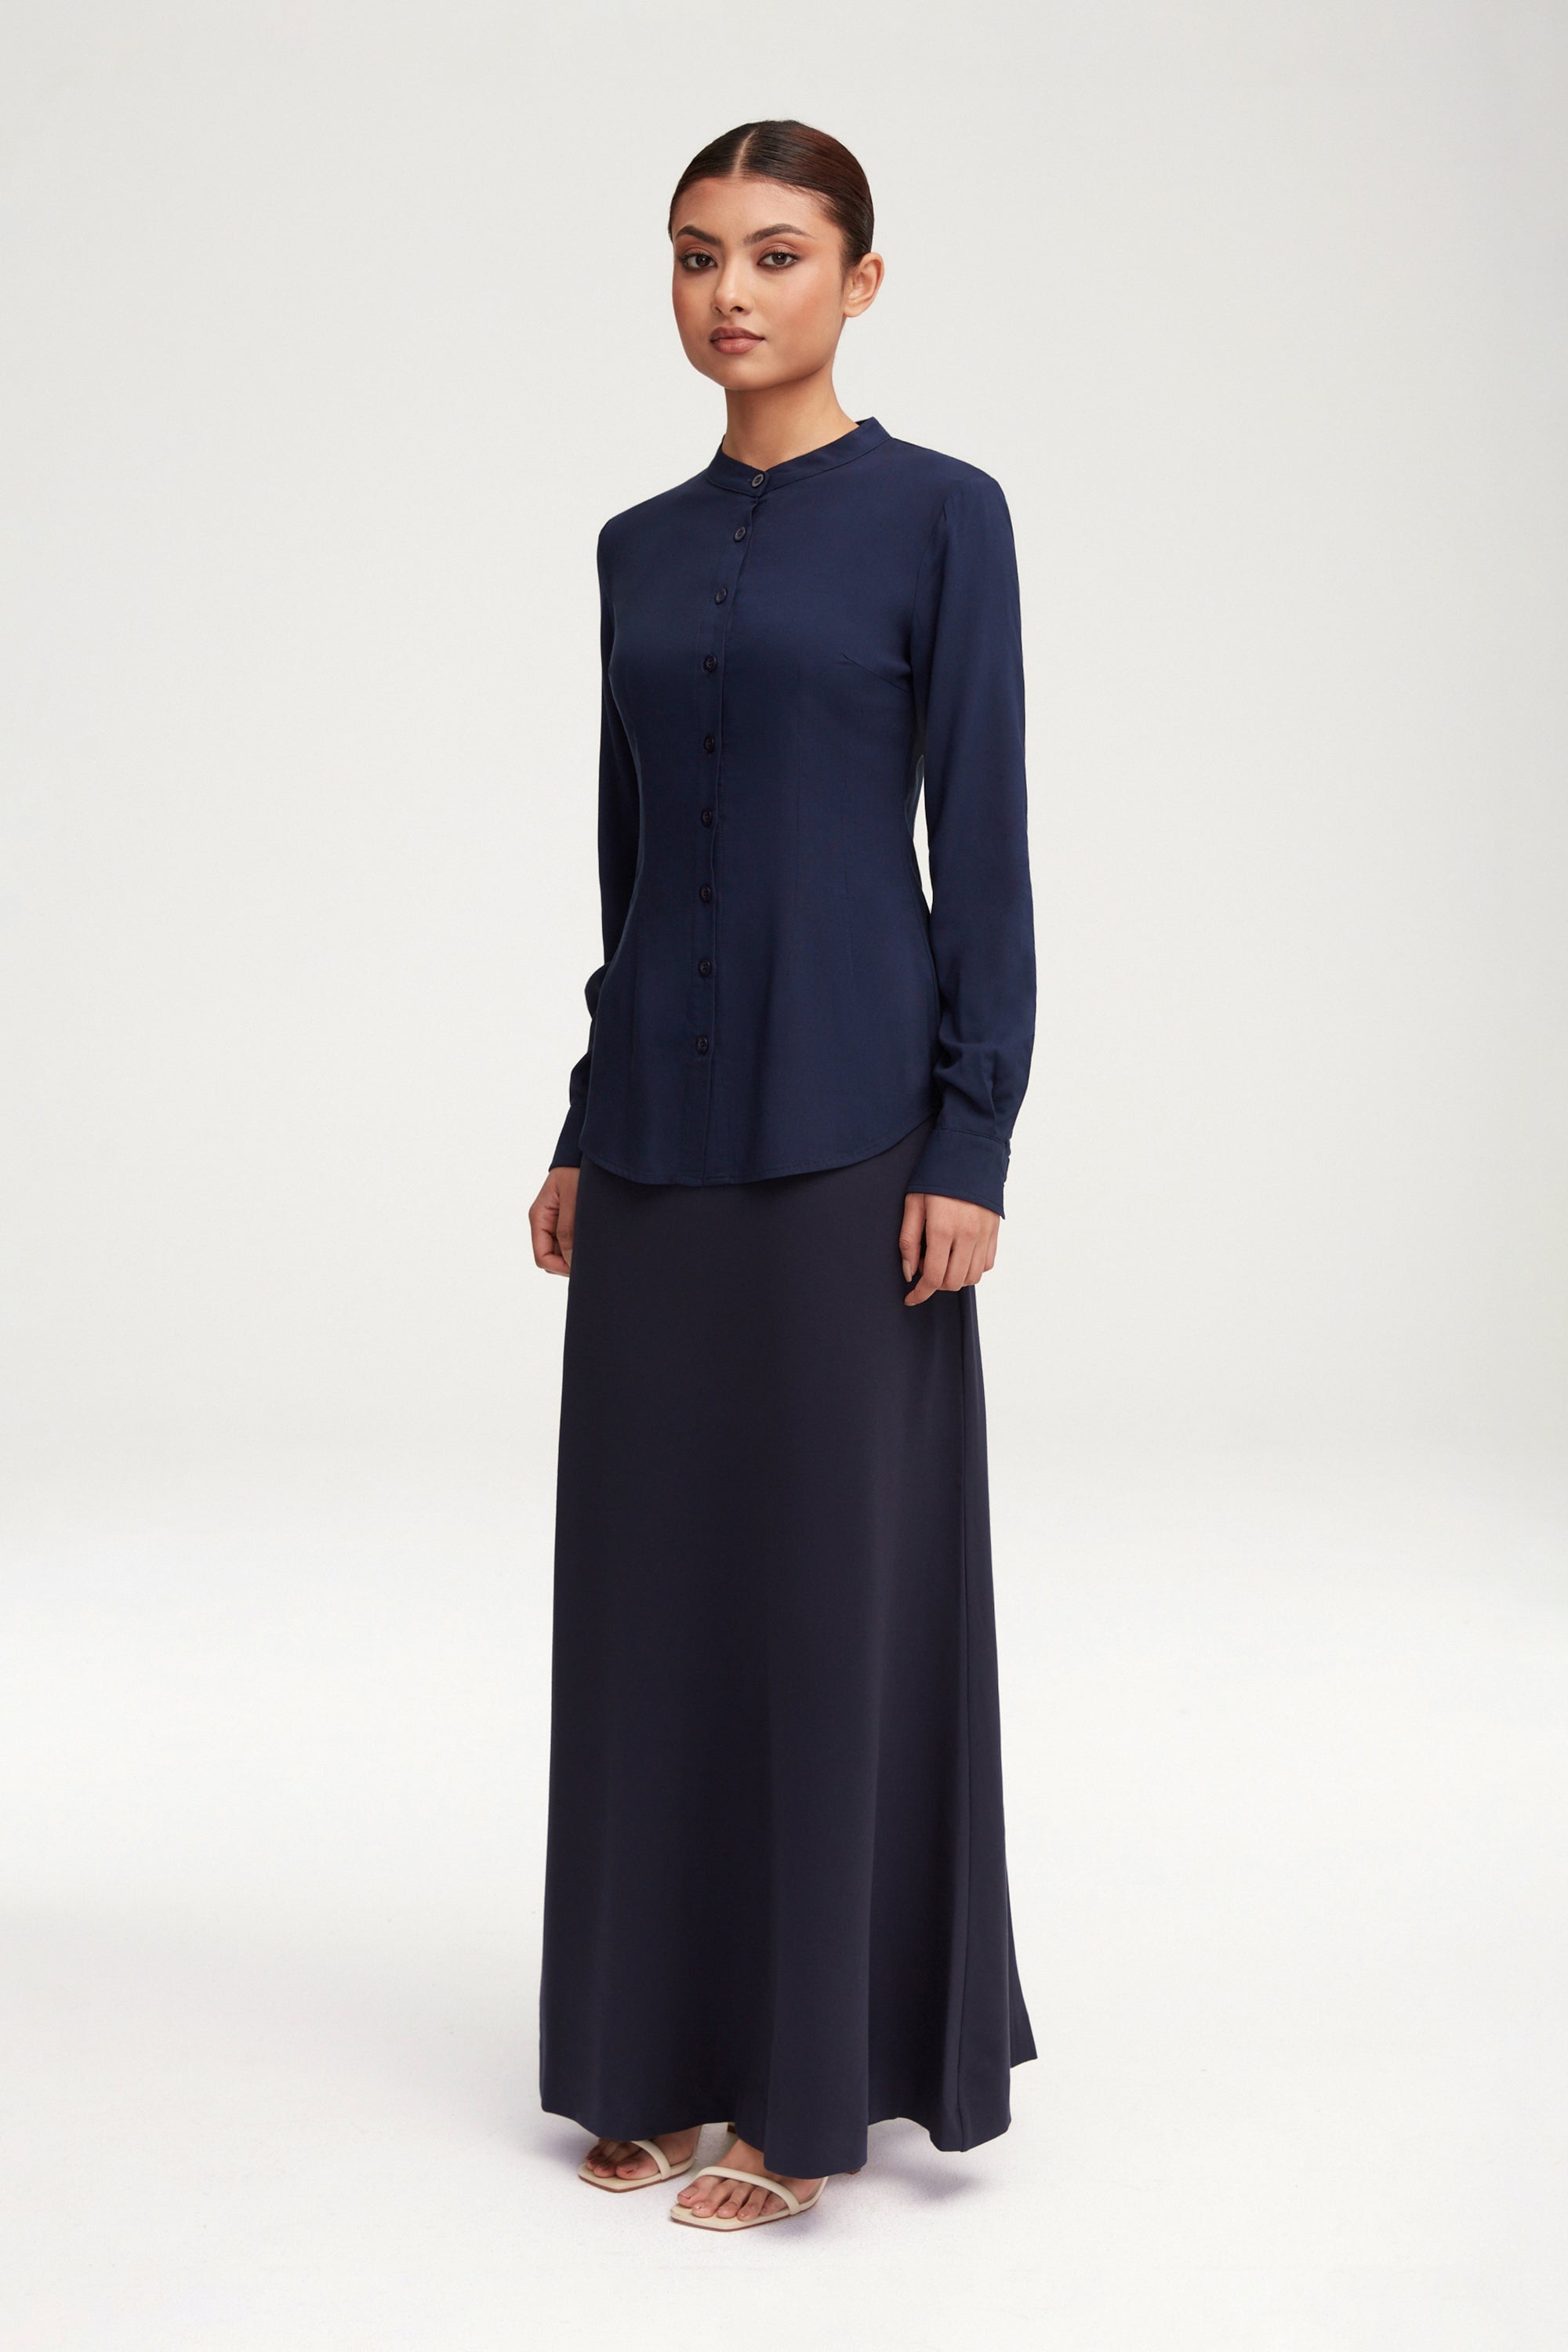 Essential Jersey A-Line Maxi Skirt - Navy Blue Clothing Veiled 